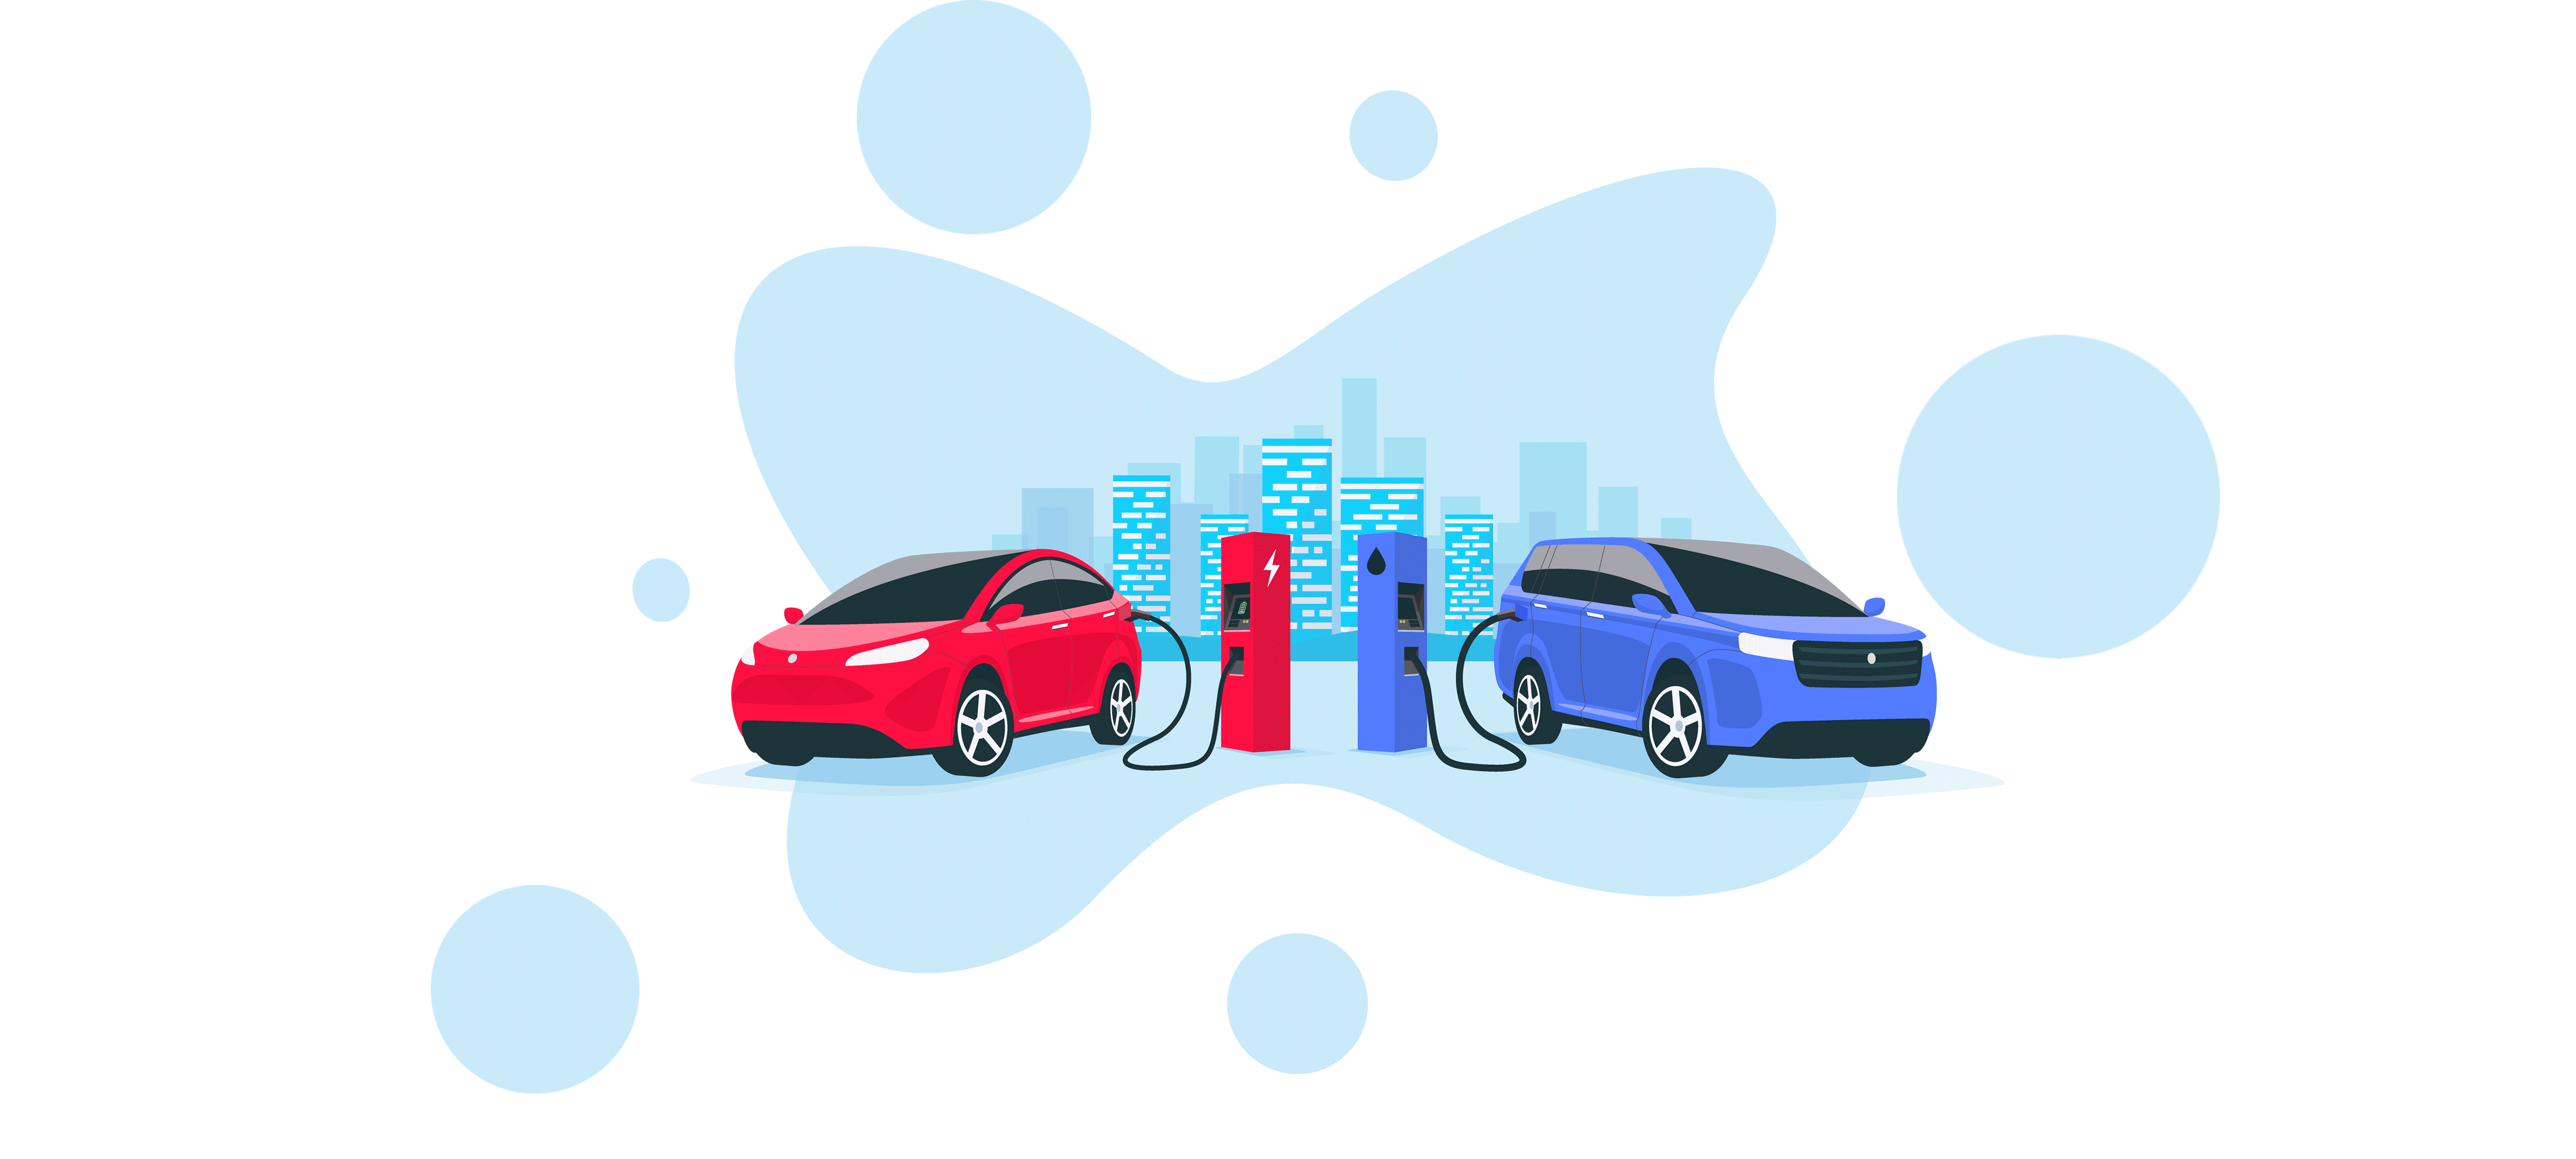 An illustration indicating a verdict of emissions between petrol cars and electric vehicles 